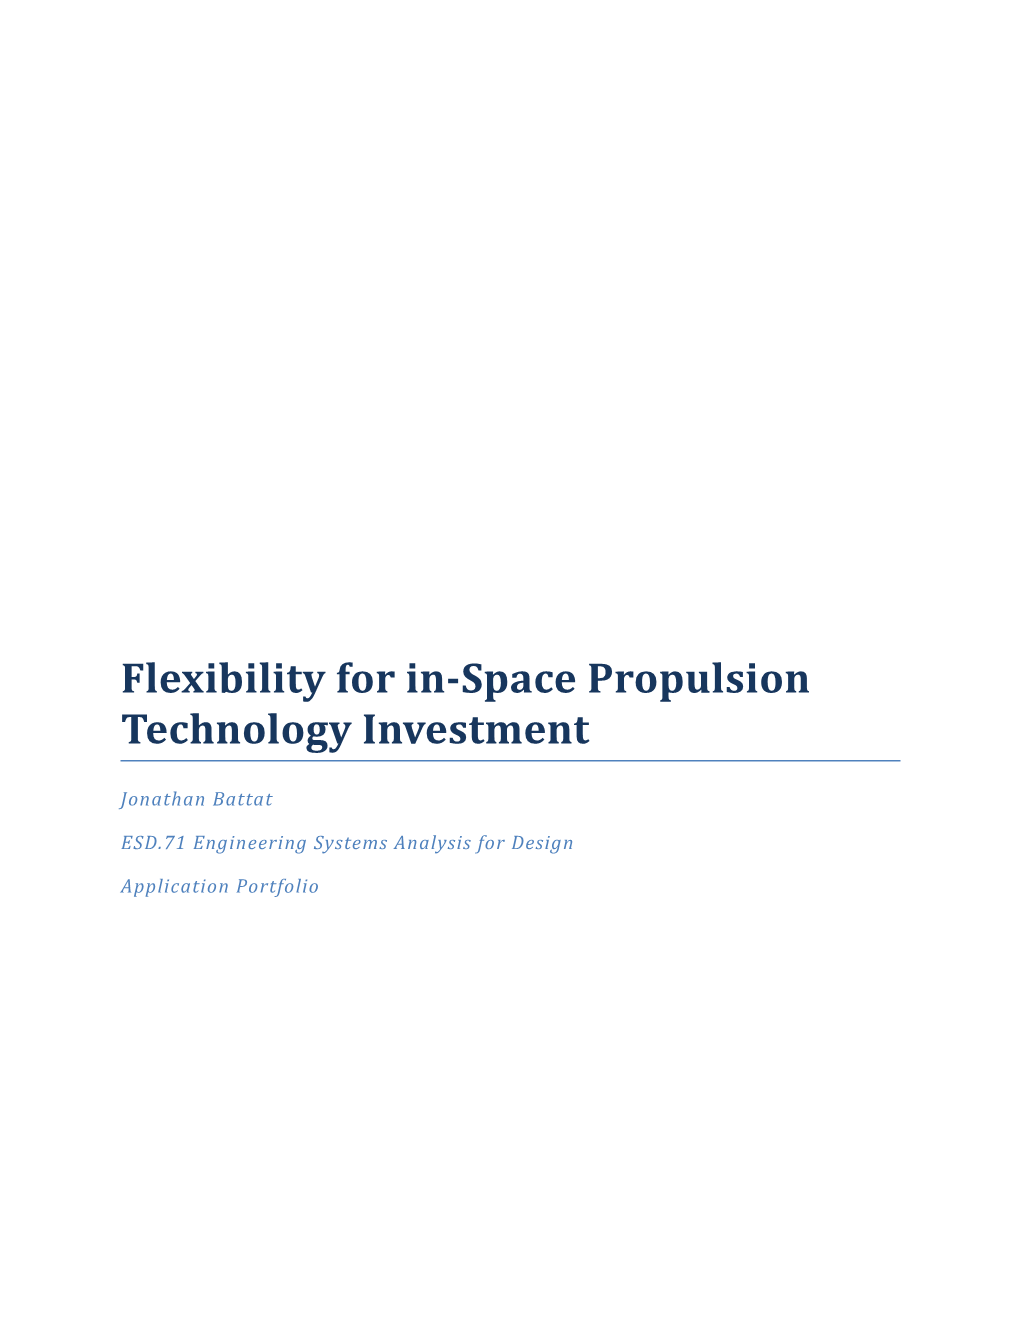 Flexibility for In-Space Propulsion Technology Investment